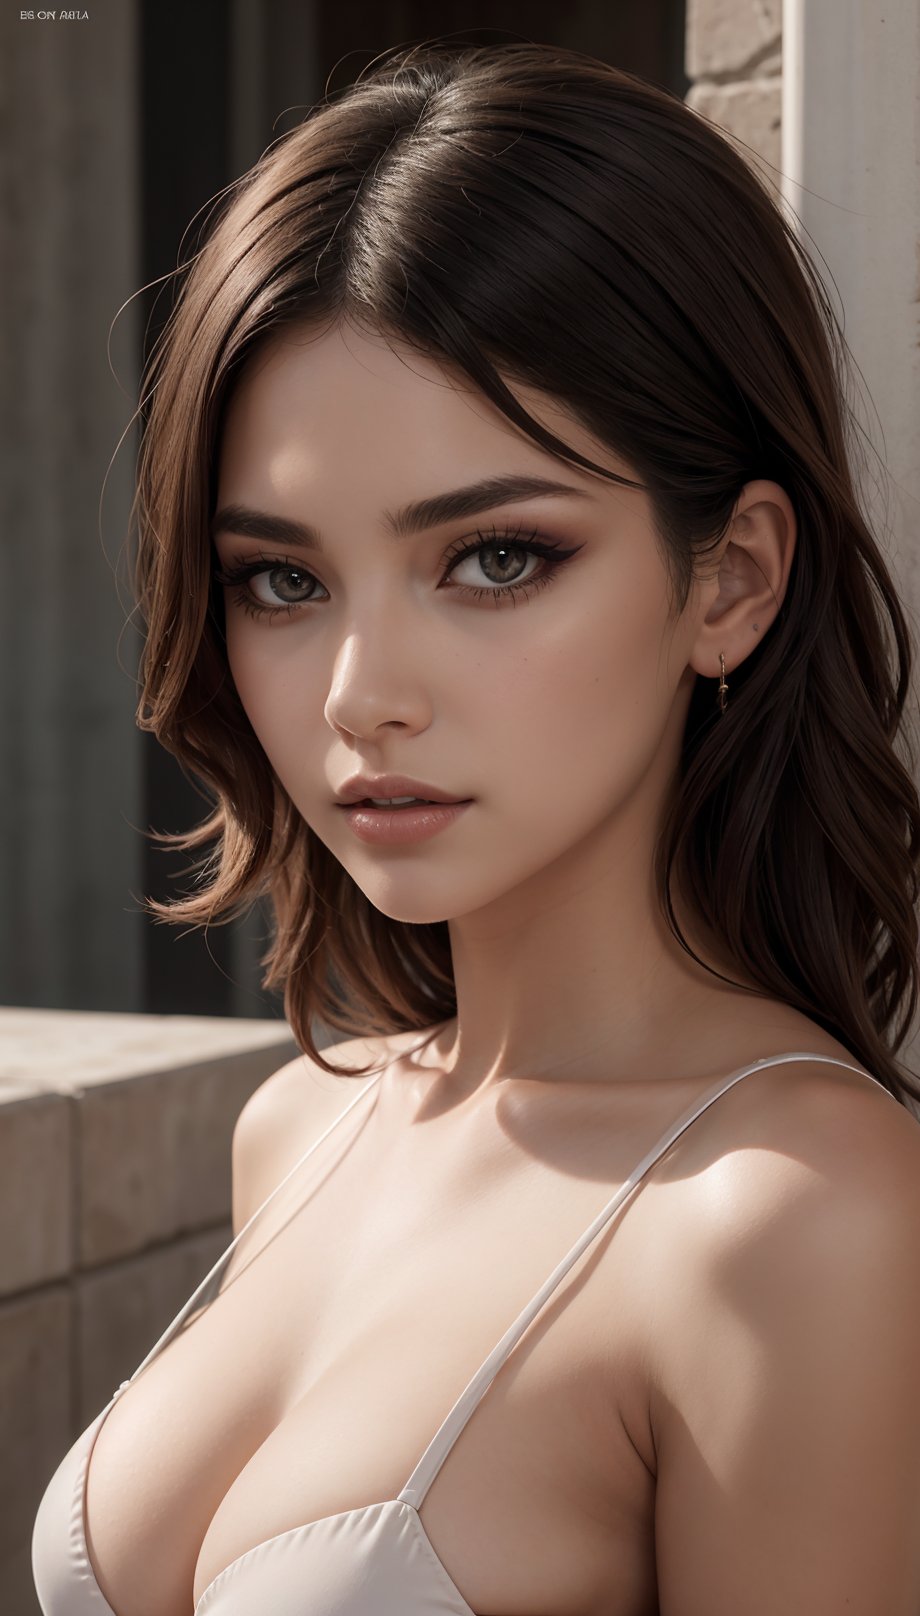 Our cover model exudes confidence in a daring sheer dress with strategic cut-outs that reveal just enough. Her hair cascades in loose waves, and her makeup boasts a sultry smoky eye and a glossy nude lip. Discover the allure of the sheer trend, very cool face, cat eye face